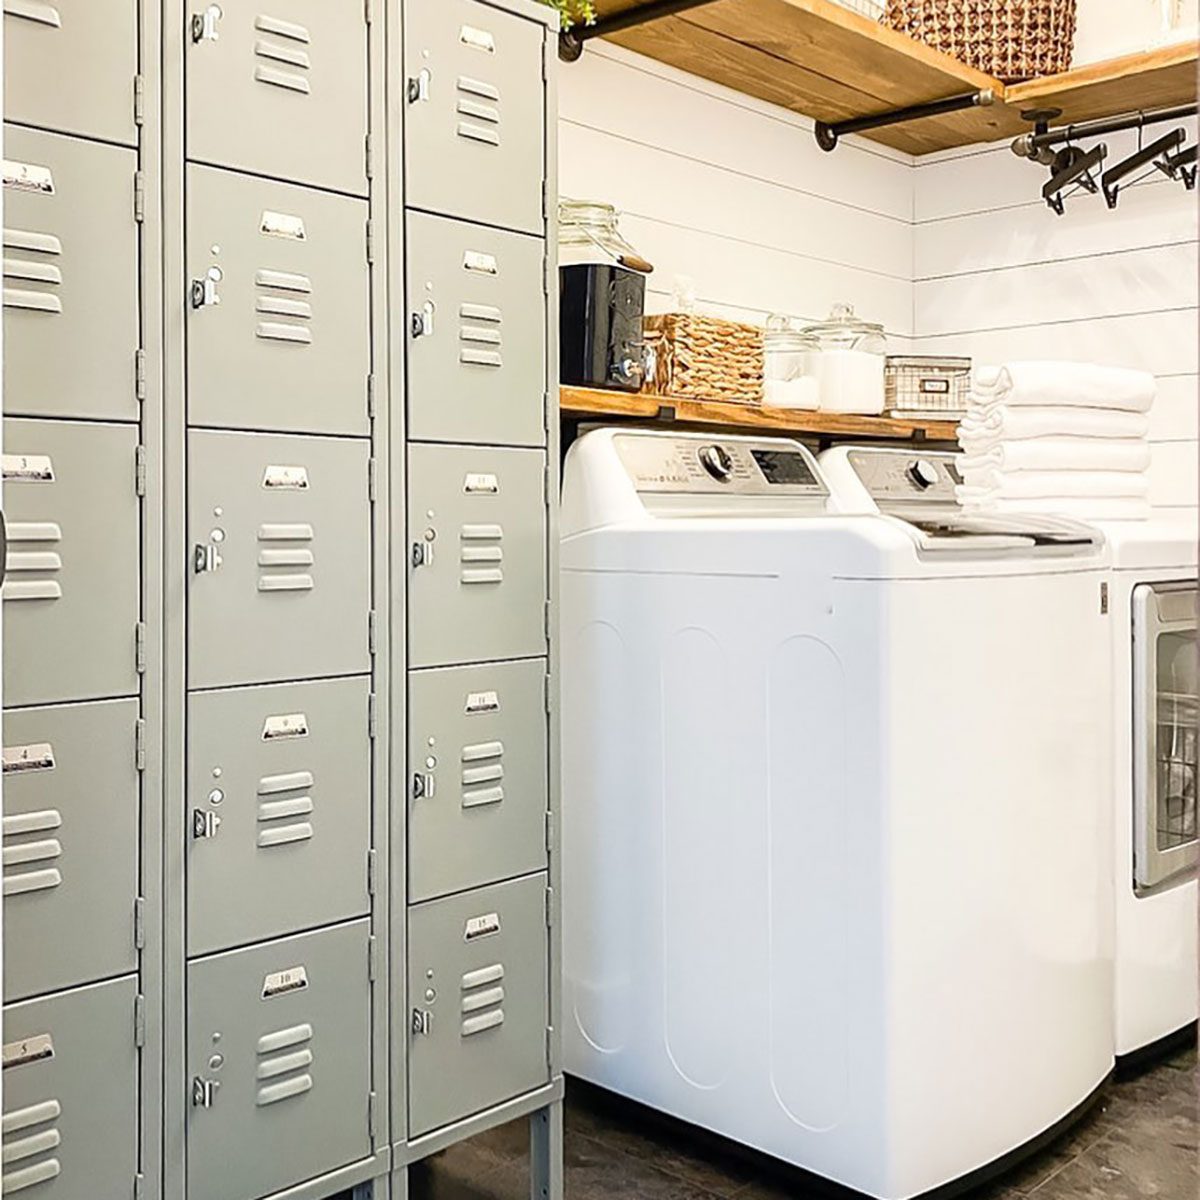 6 Hidden Laundry Room Storage Ideas That Conceal Clutter